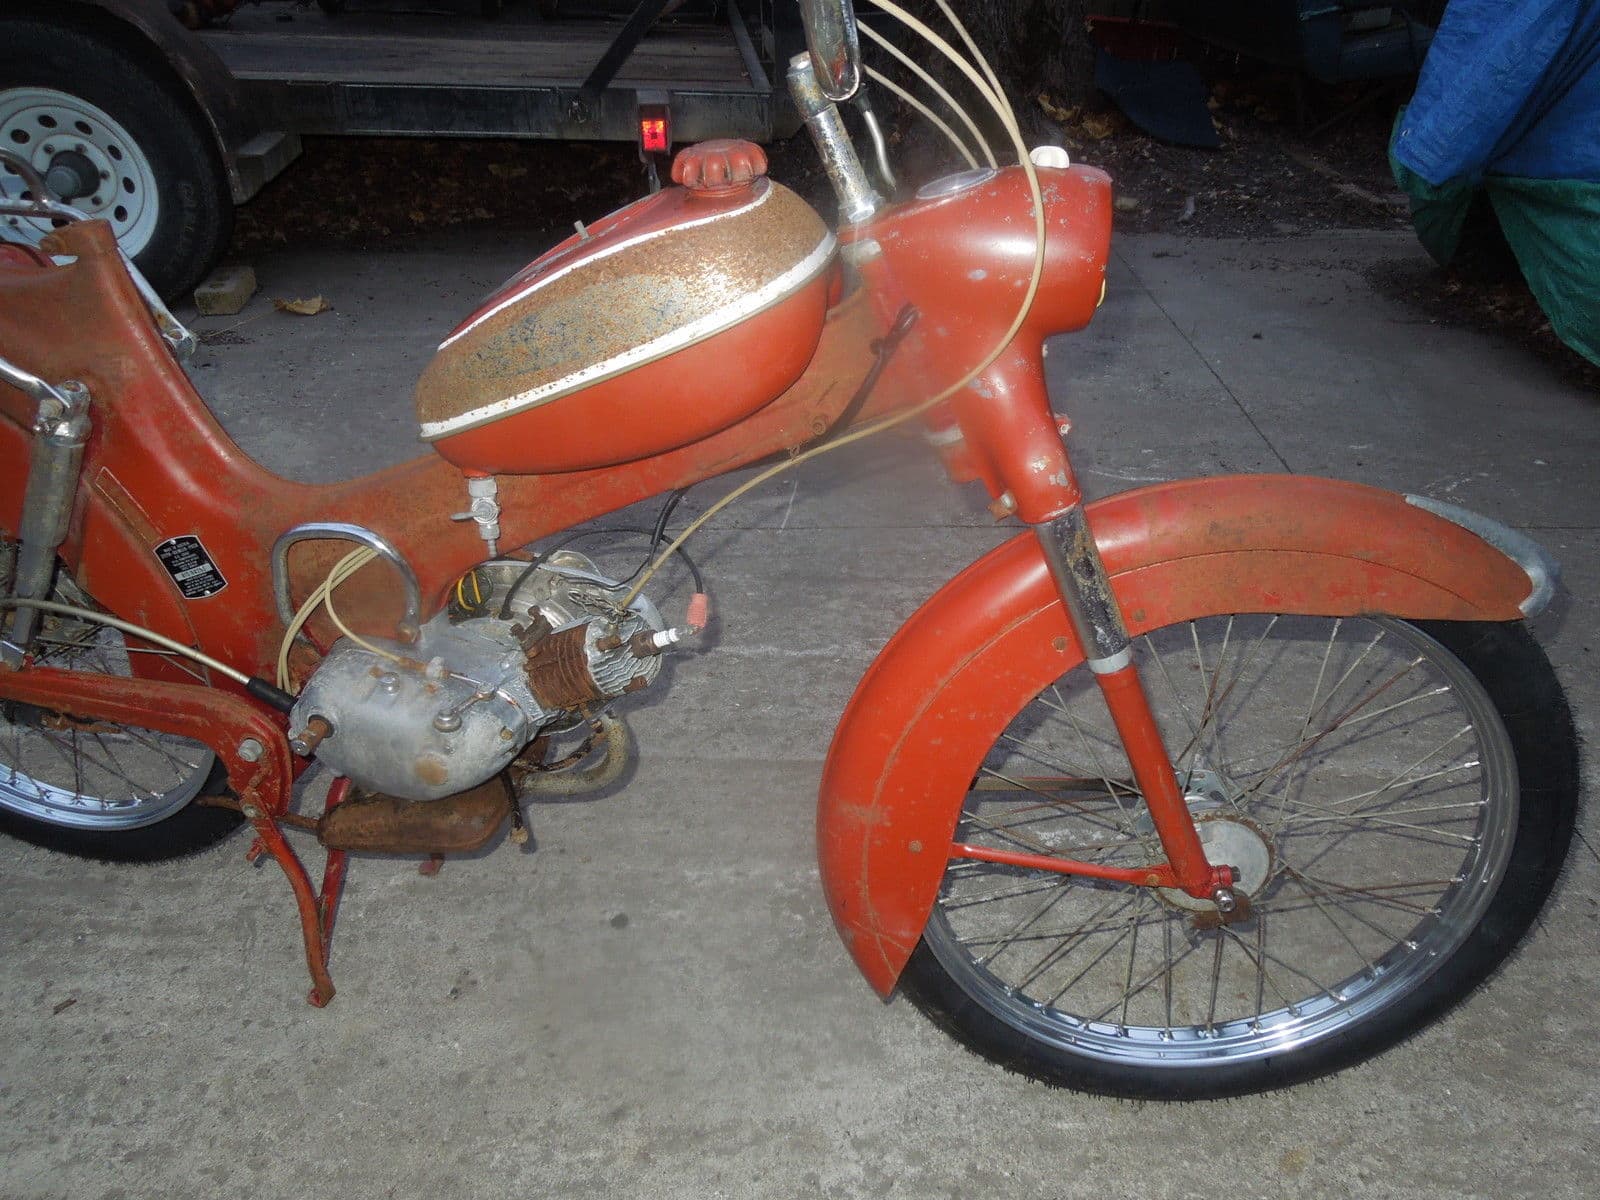 810.94250 Allstate Mo-Ped De Luxe Puch